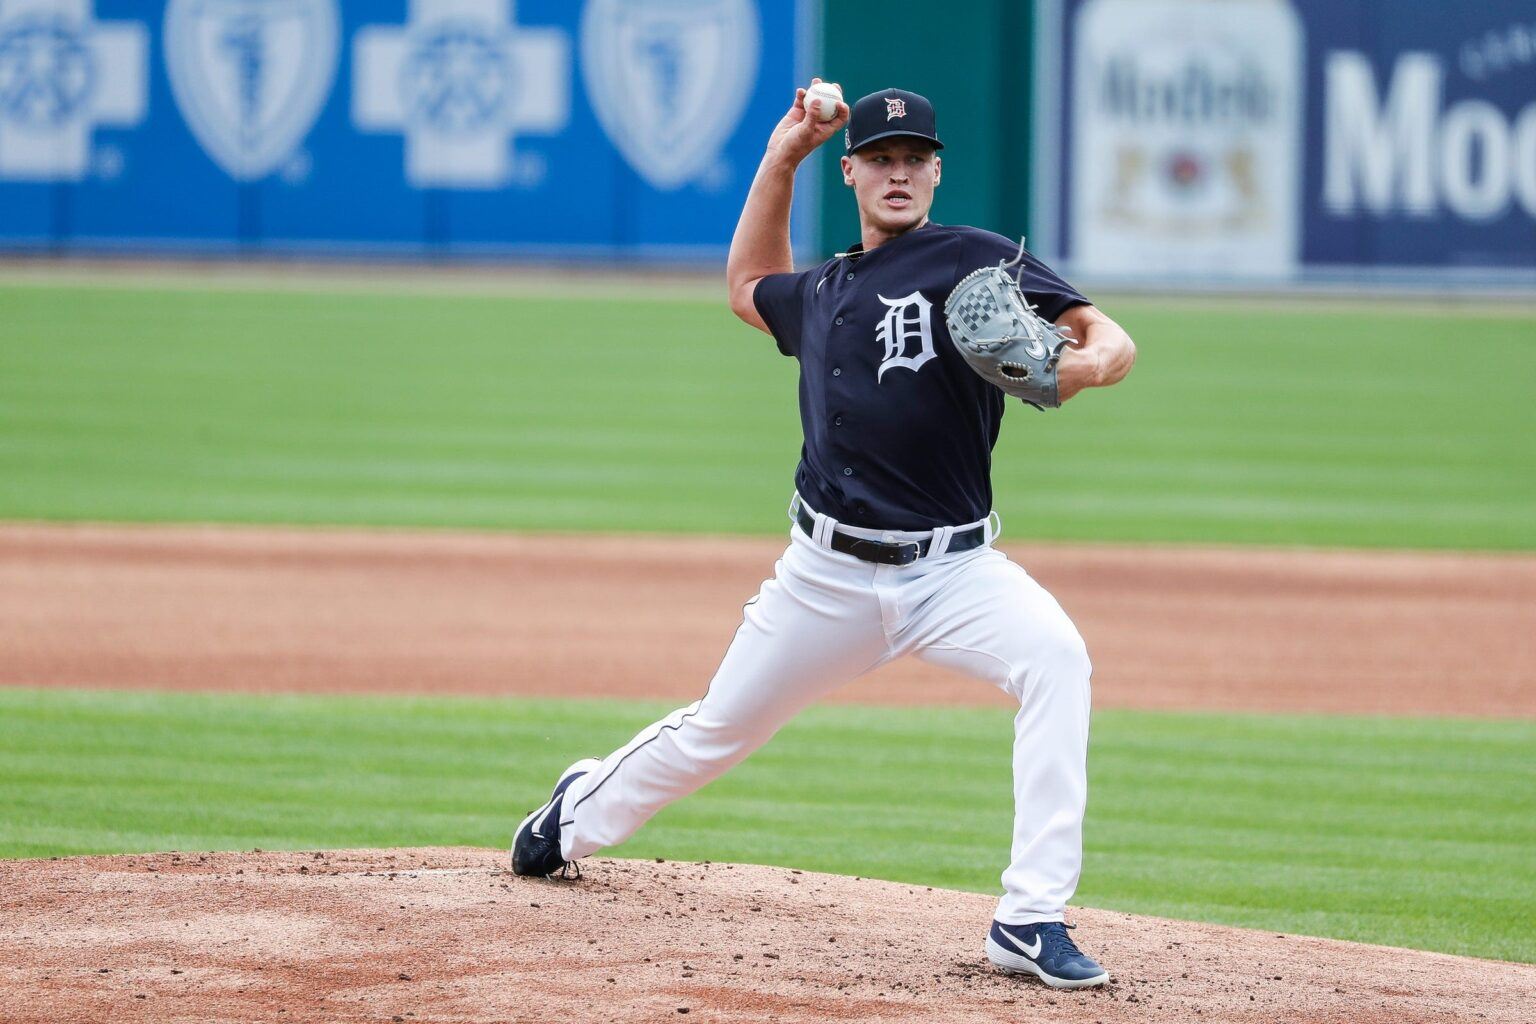 Tigers’ prospect Manning to make debut Thursday Lindy's Sports